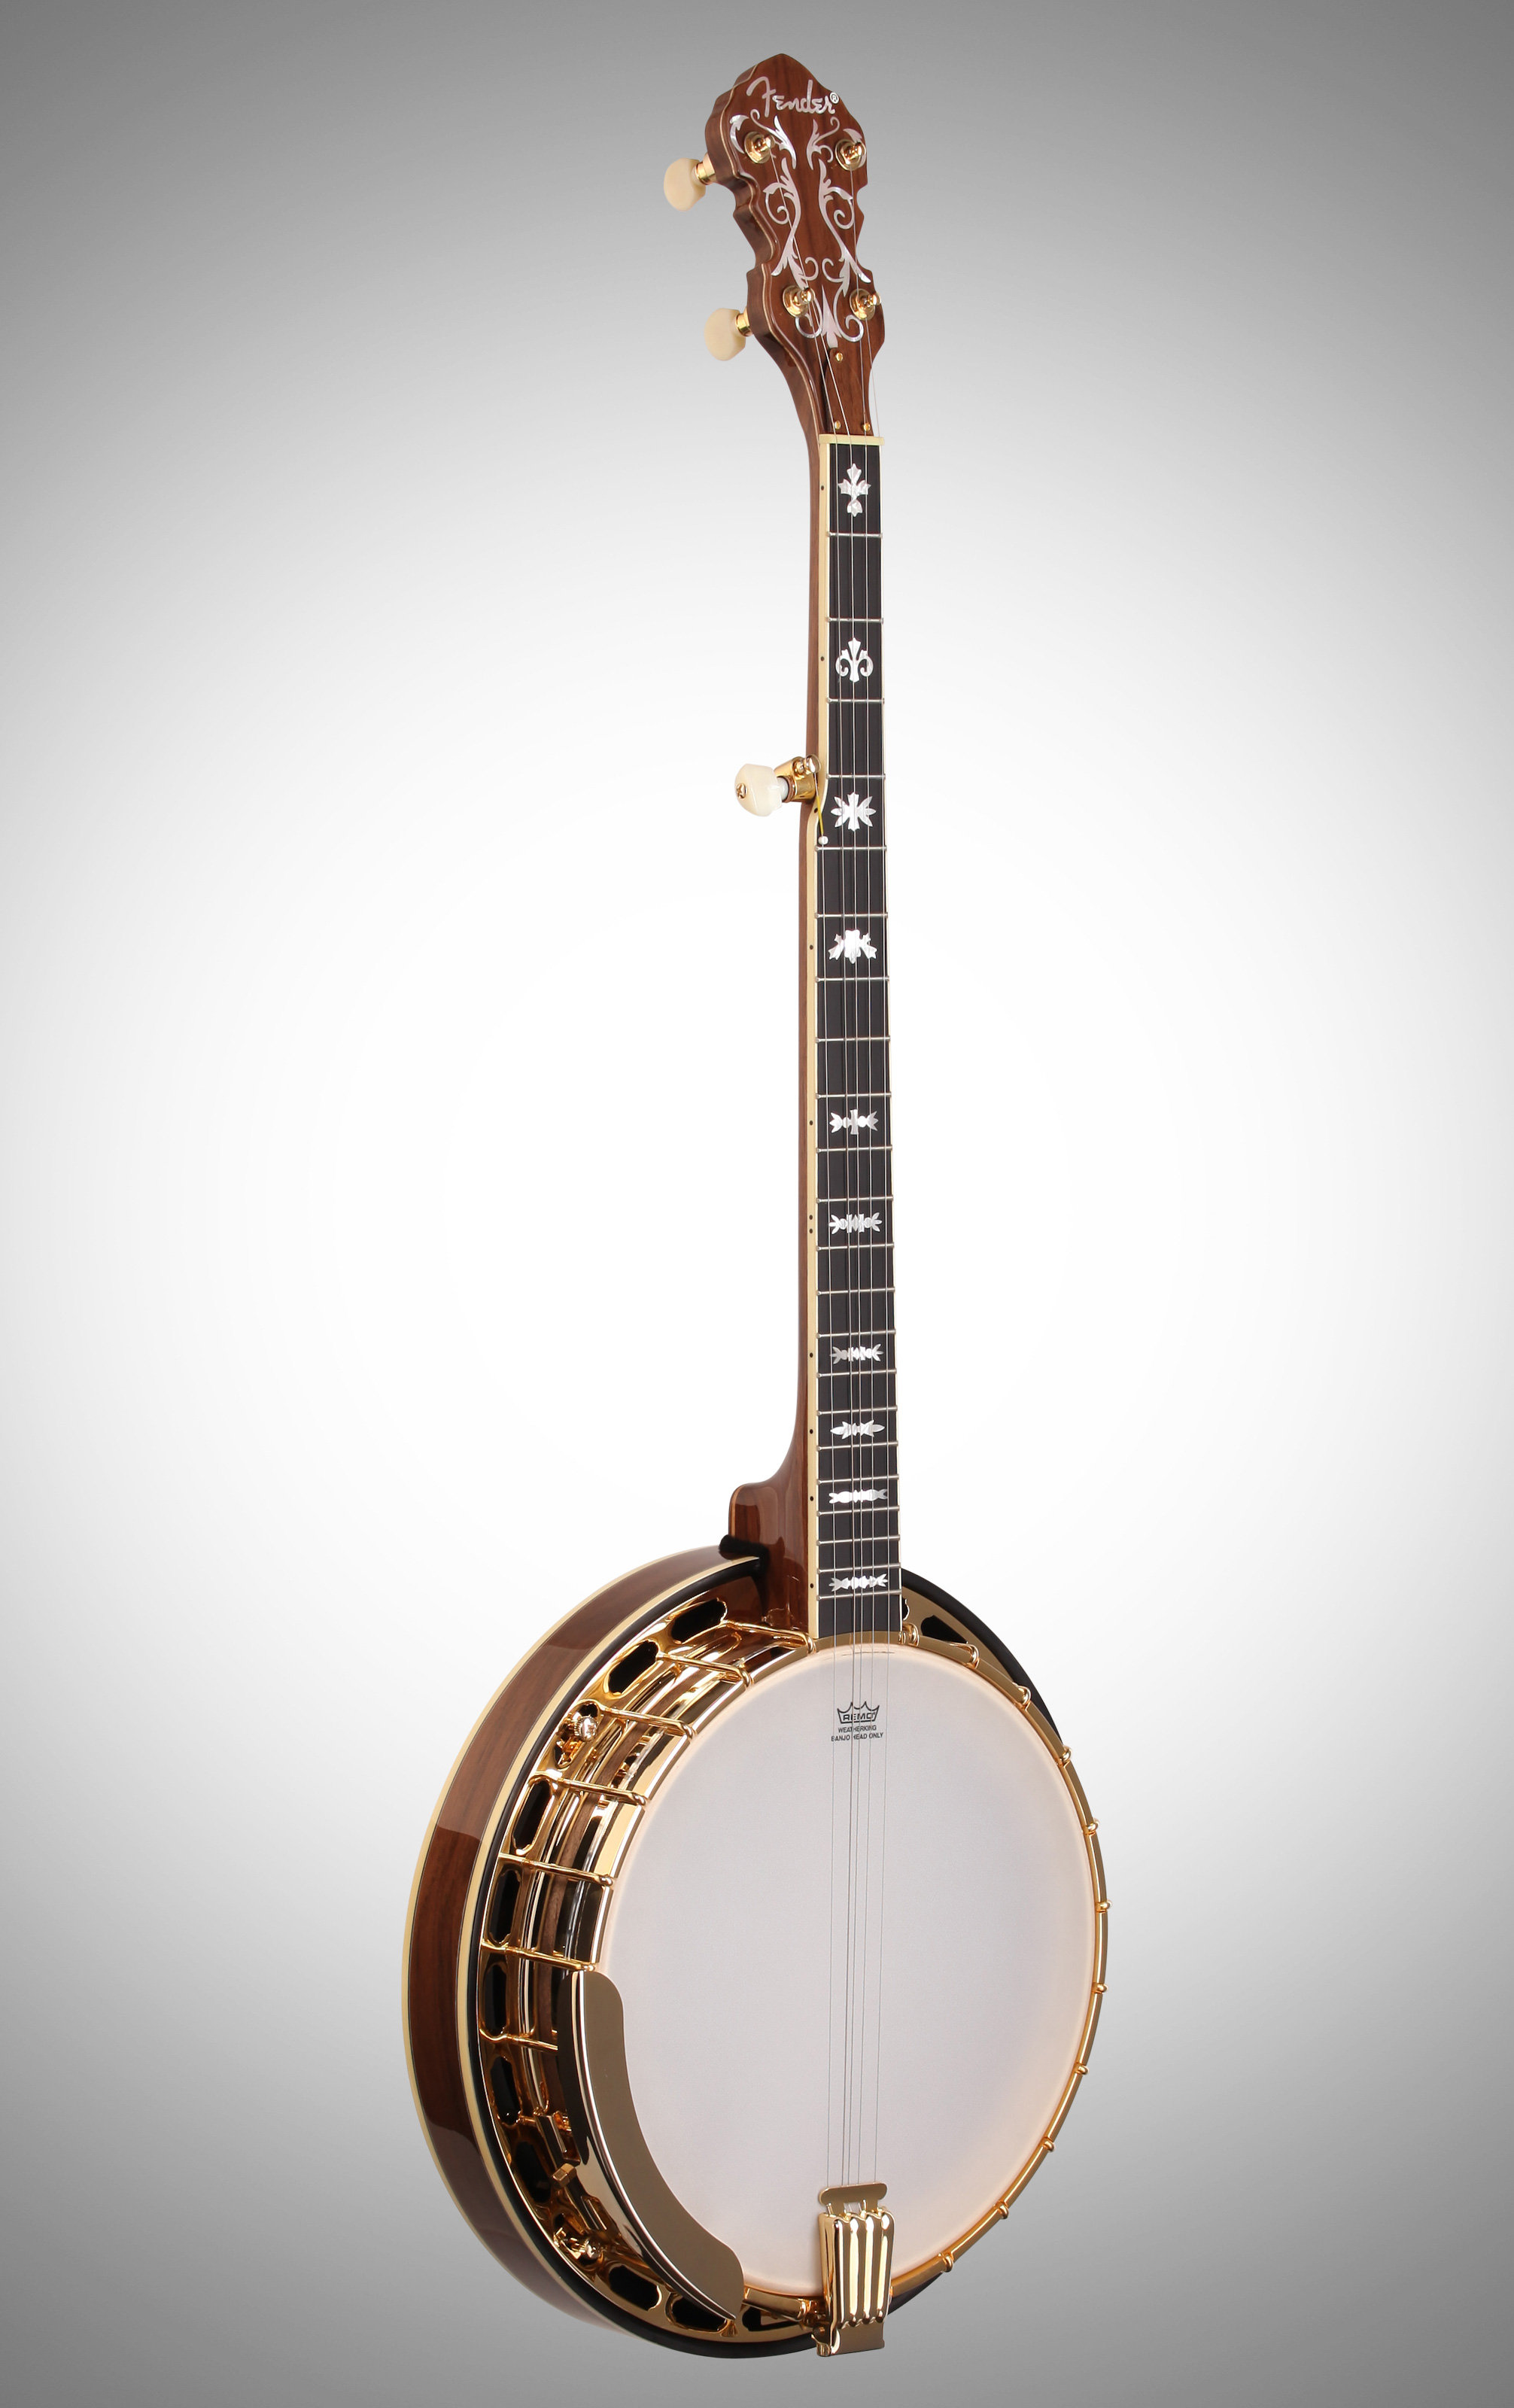 Fender FB-59 Banjo with Case at zZounds2012 x 3200